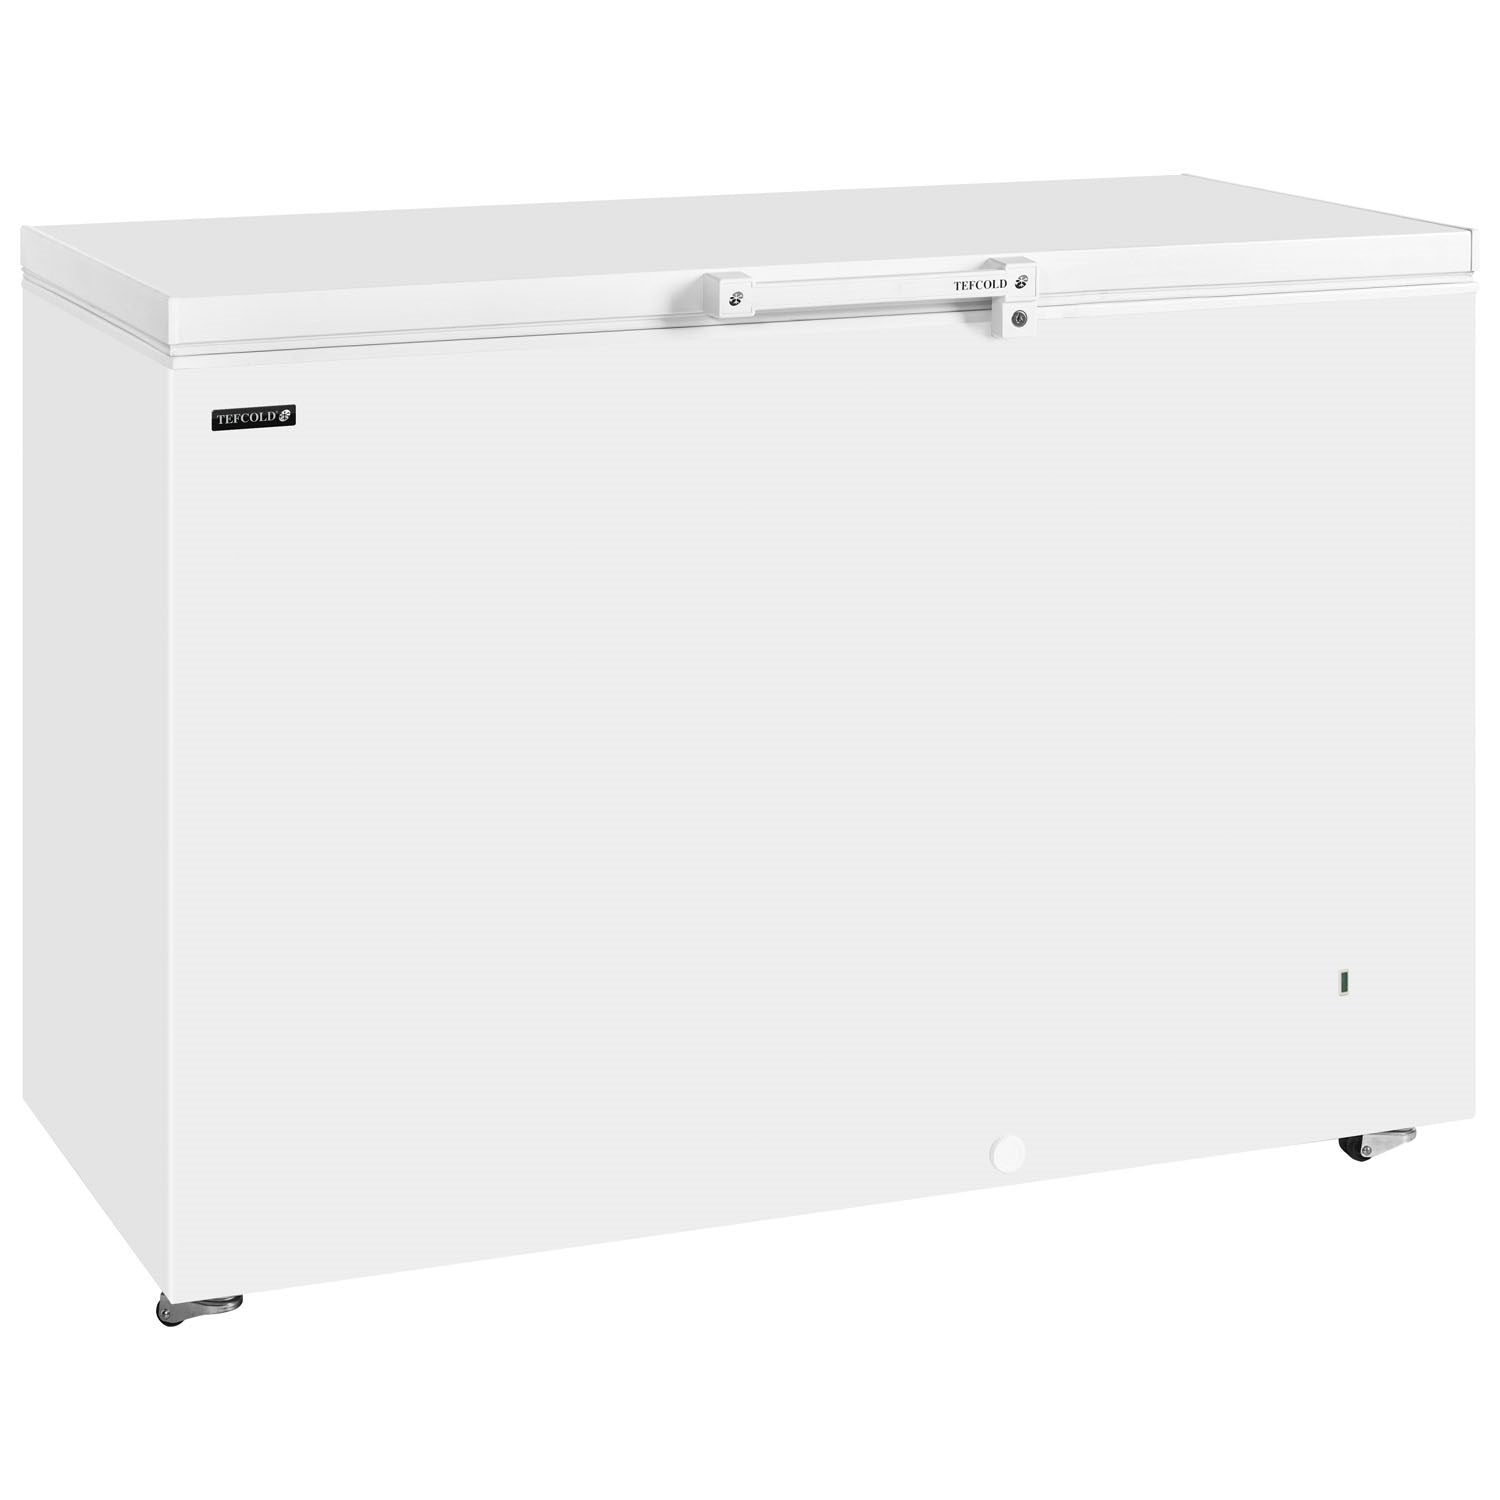 Tefcold GM Range Solid Lid Chest Freezer.Product Ref:00482.MODEL:GM400..🚚 4-6 Days Delivery